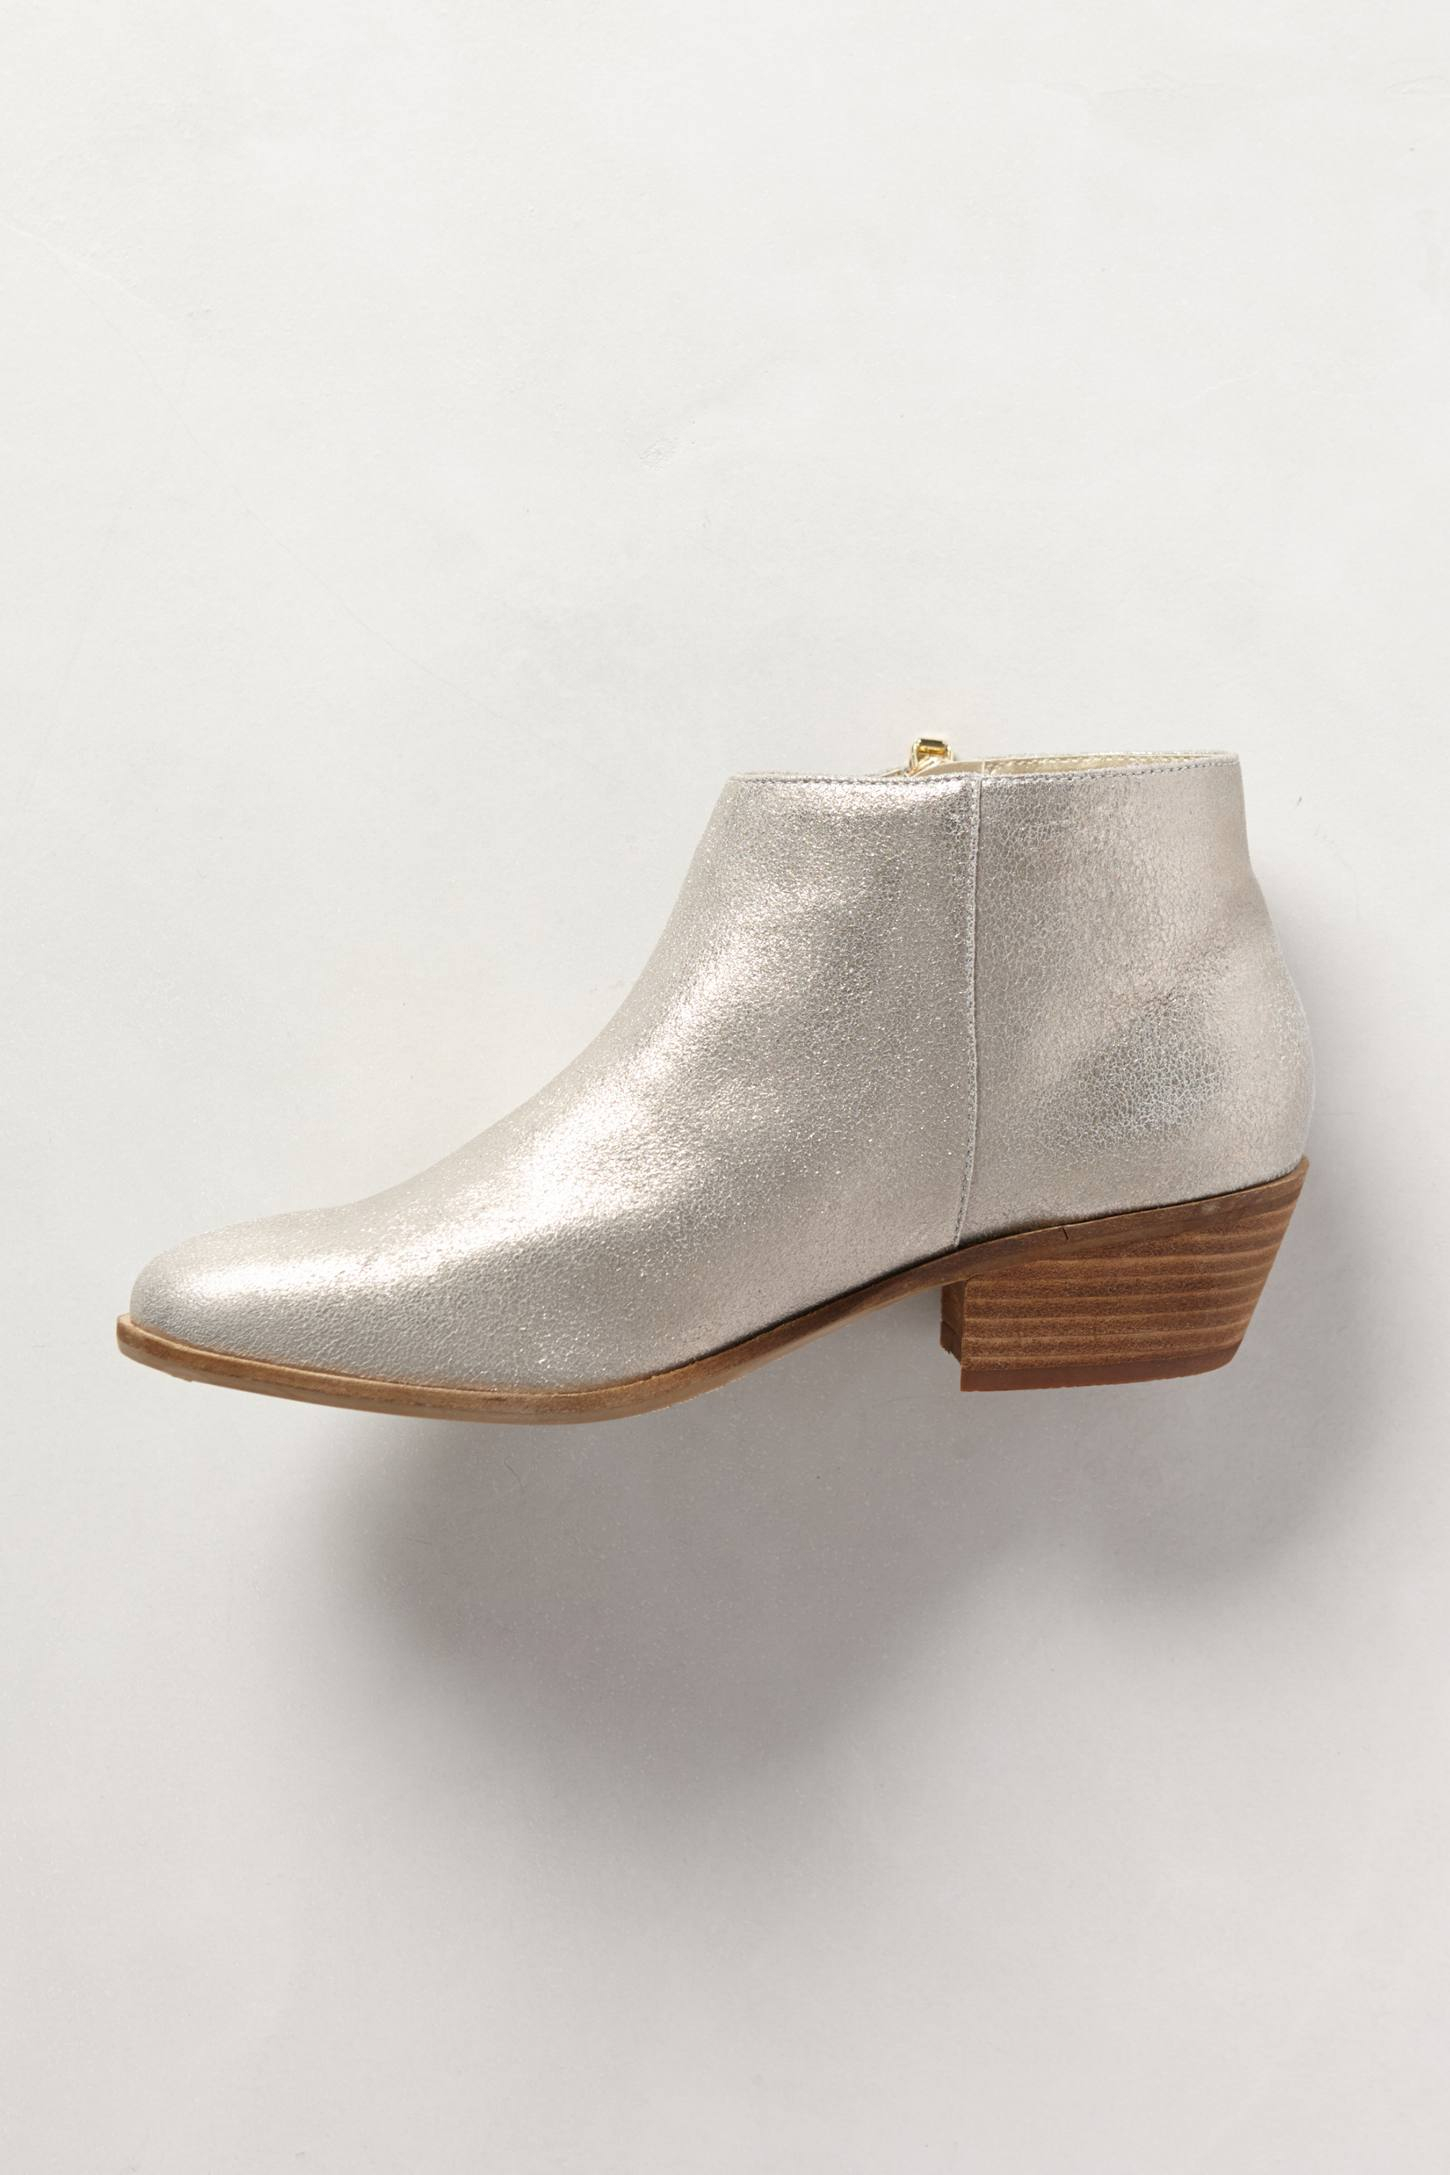 Anthropologie Shimmered Suede Booties in Metallic | Lyst